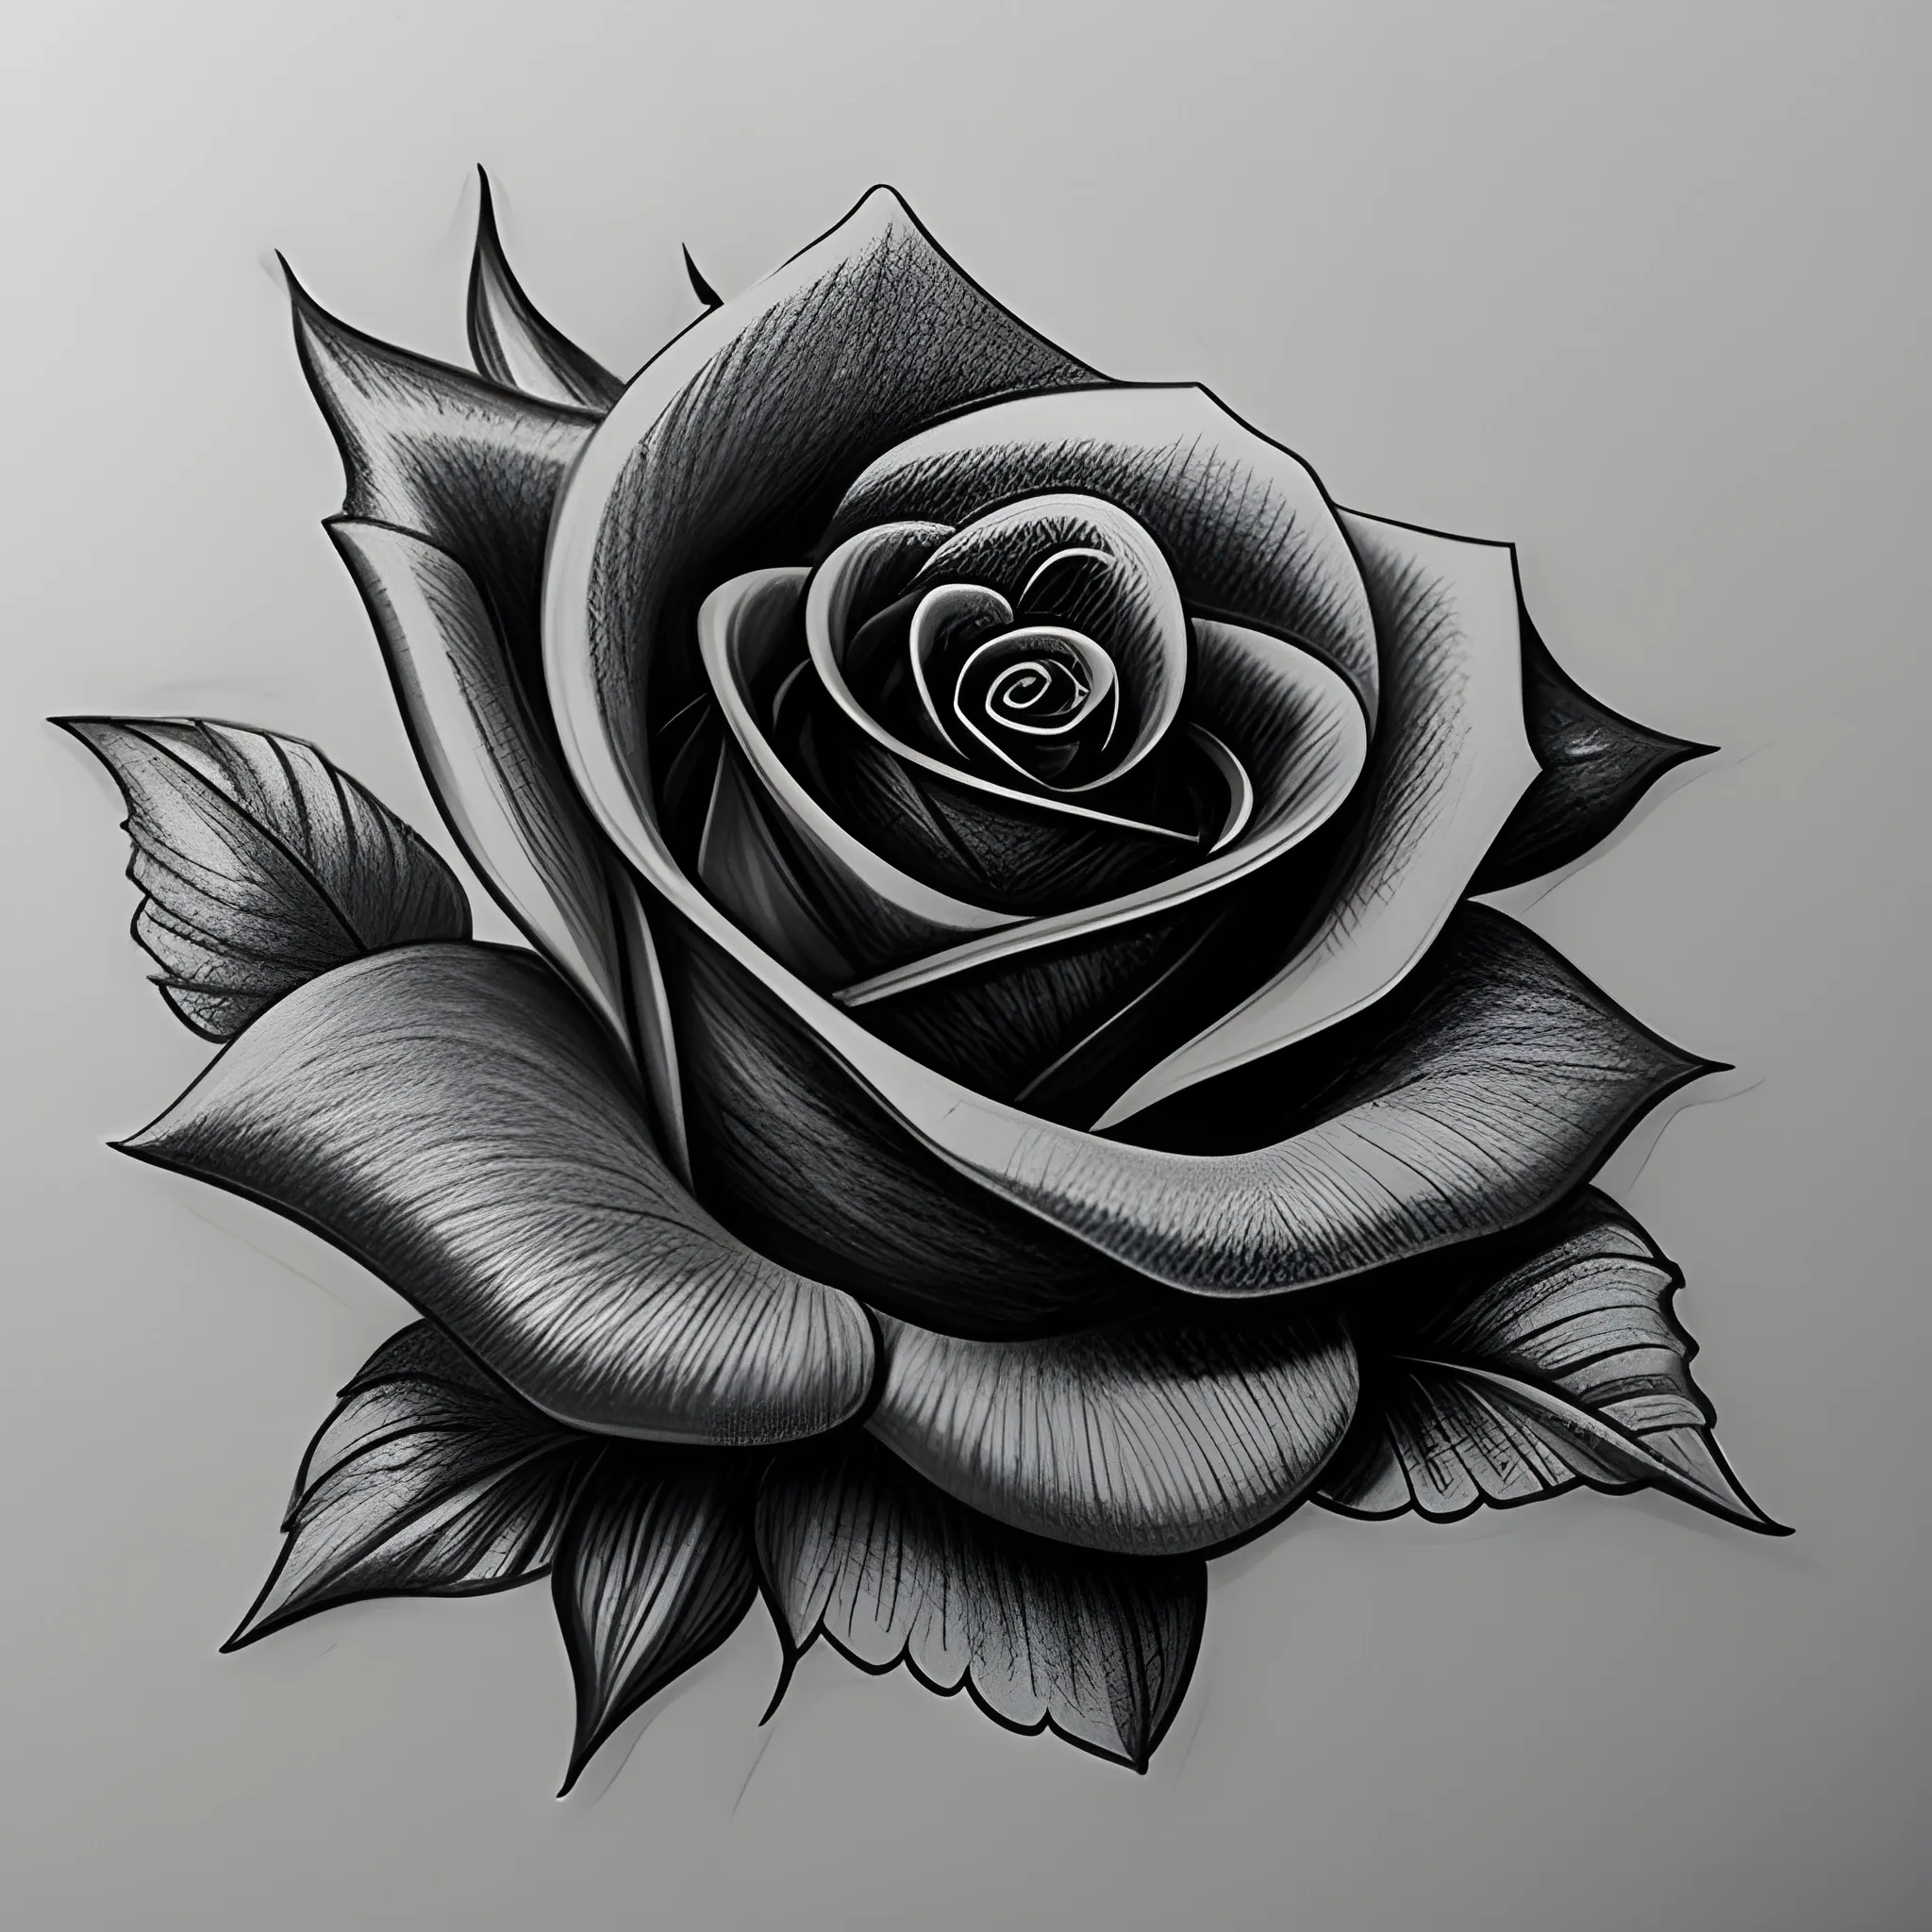 50+ Rose Hand Tattoo Designs with Meanings | Art and Design